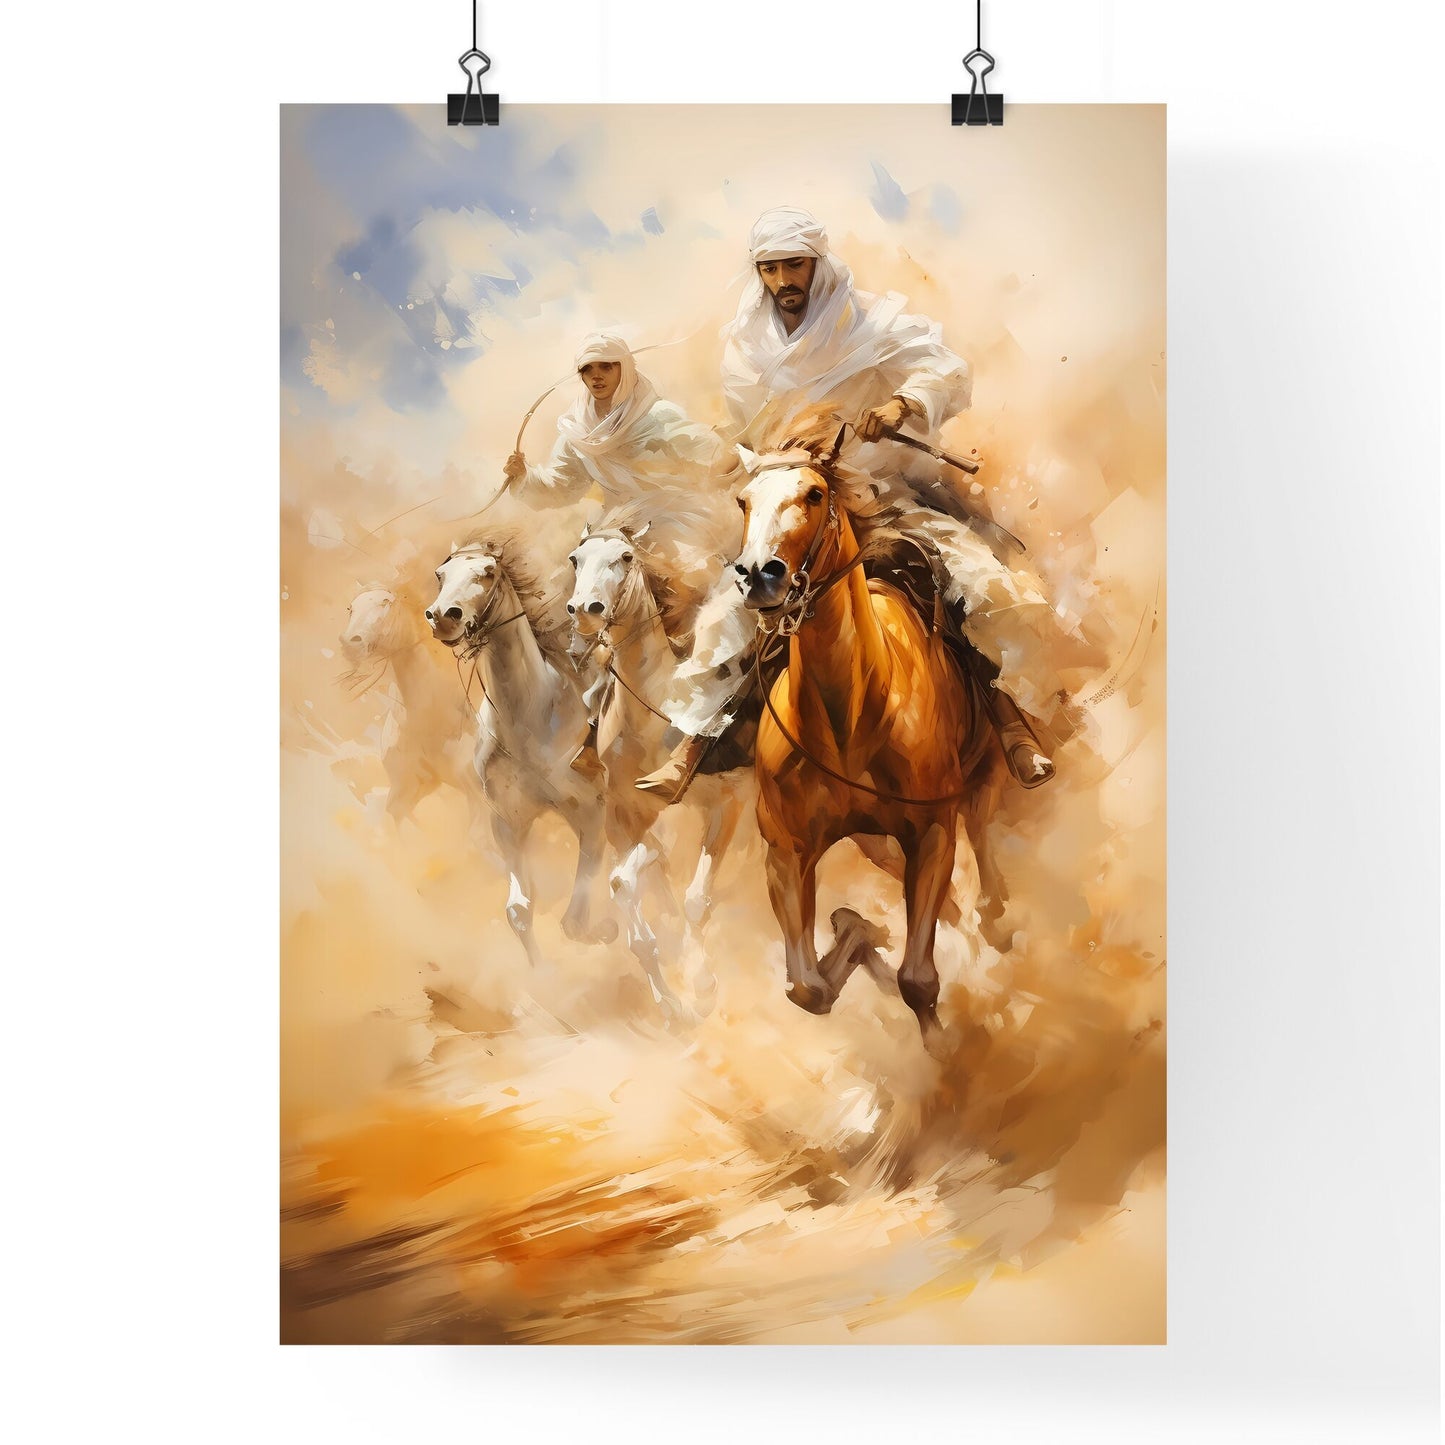 Making Sports In The Dunes Of Saudi Arabia - A Painting Of Men Riding Horses Default Title